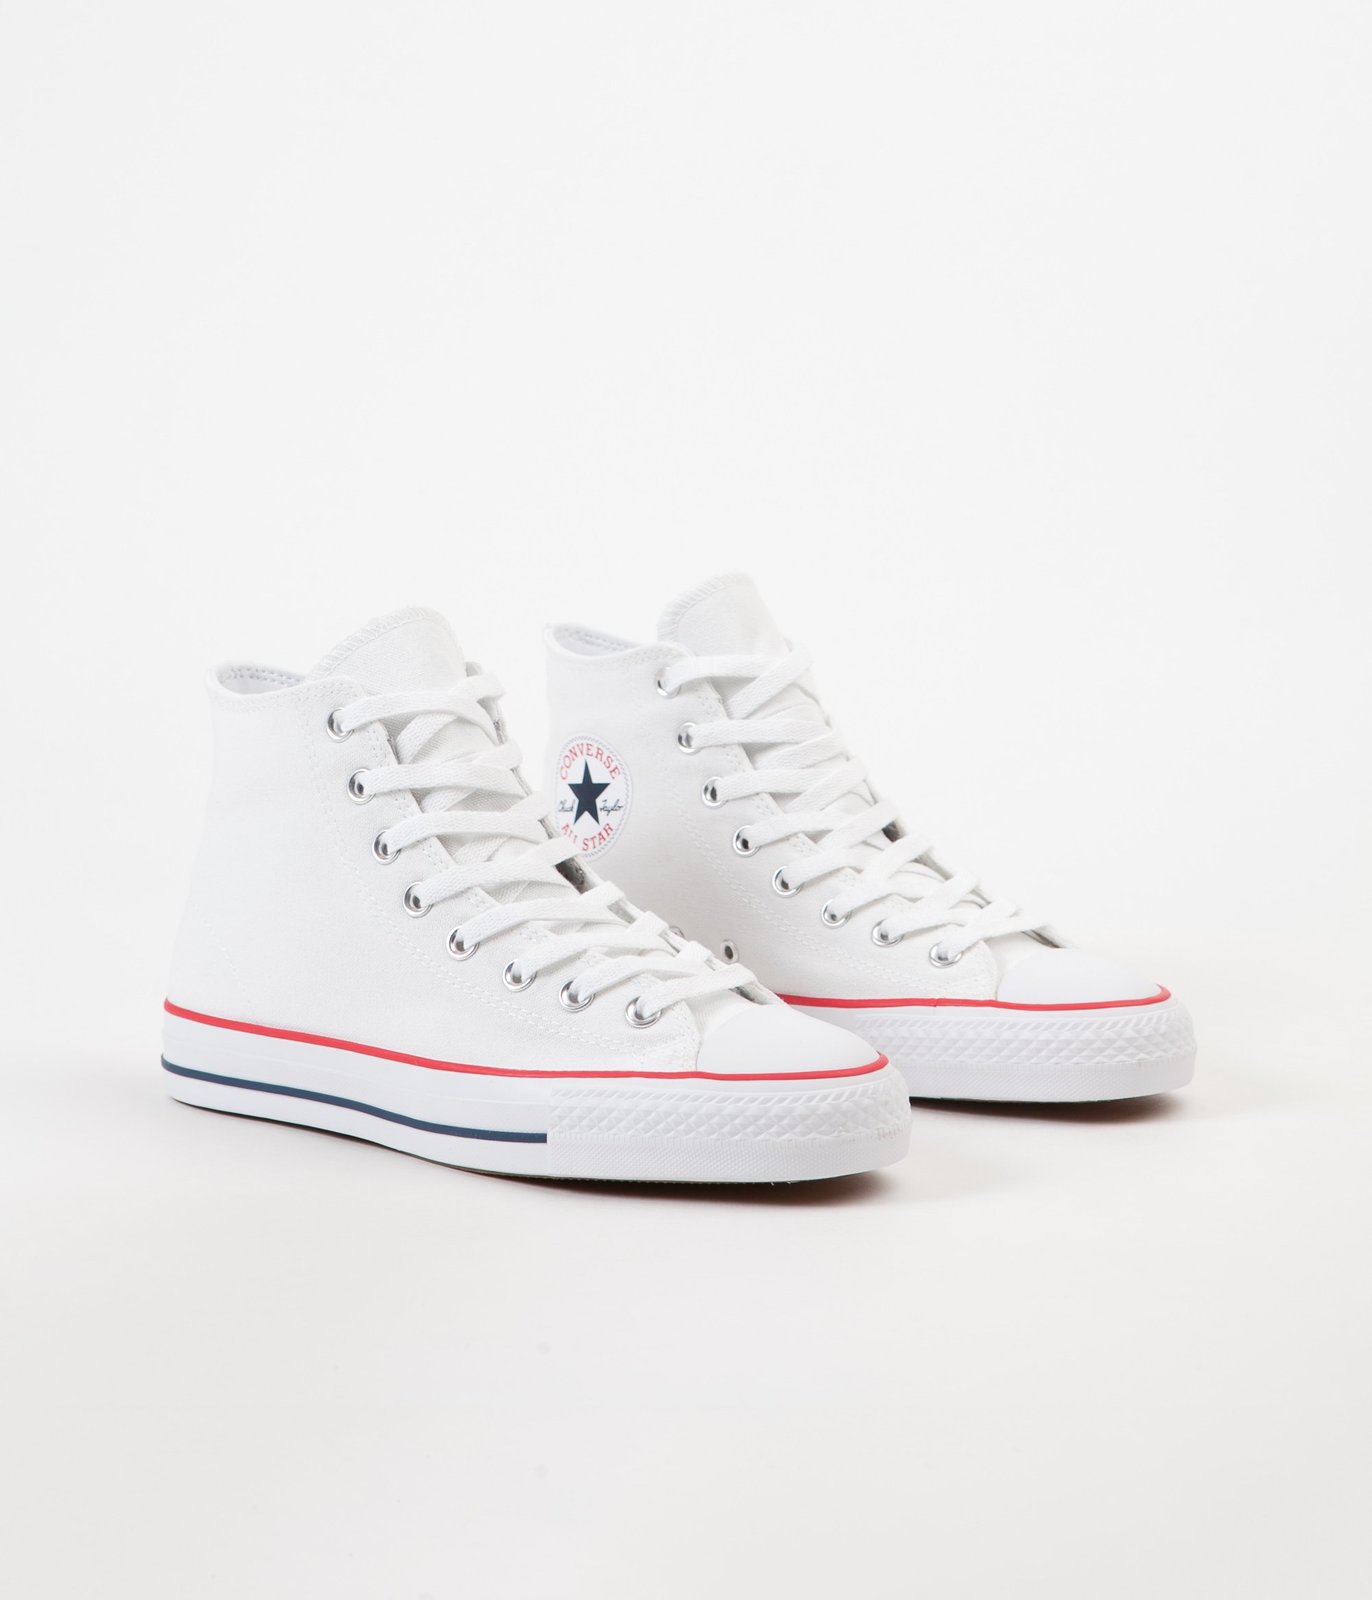 CONVERSE CTAS HI White / Red / Blue CANVAS CHUCK TAYLOR SHOES ALL STARS